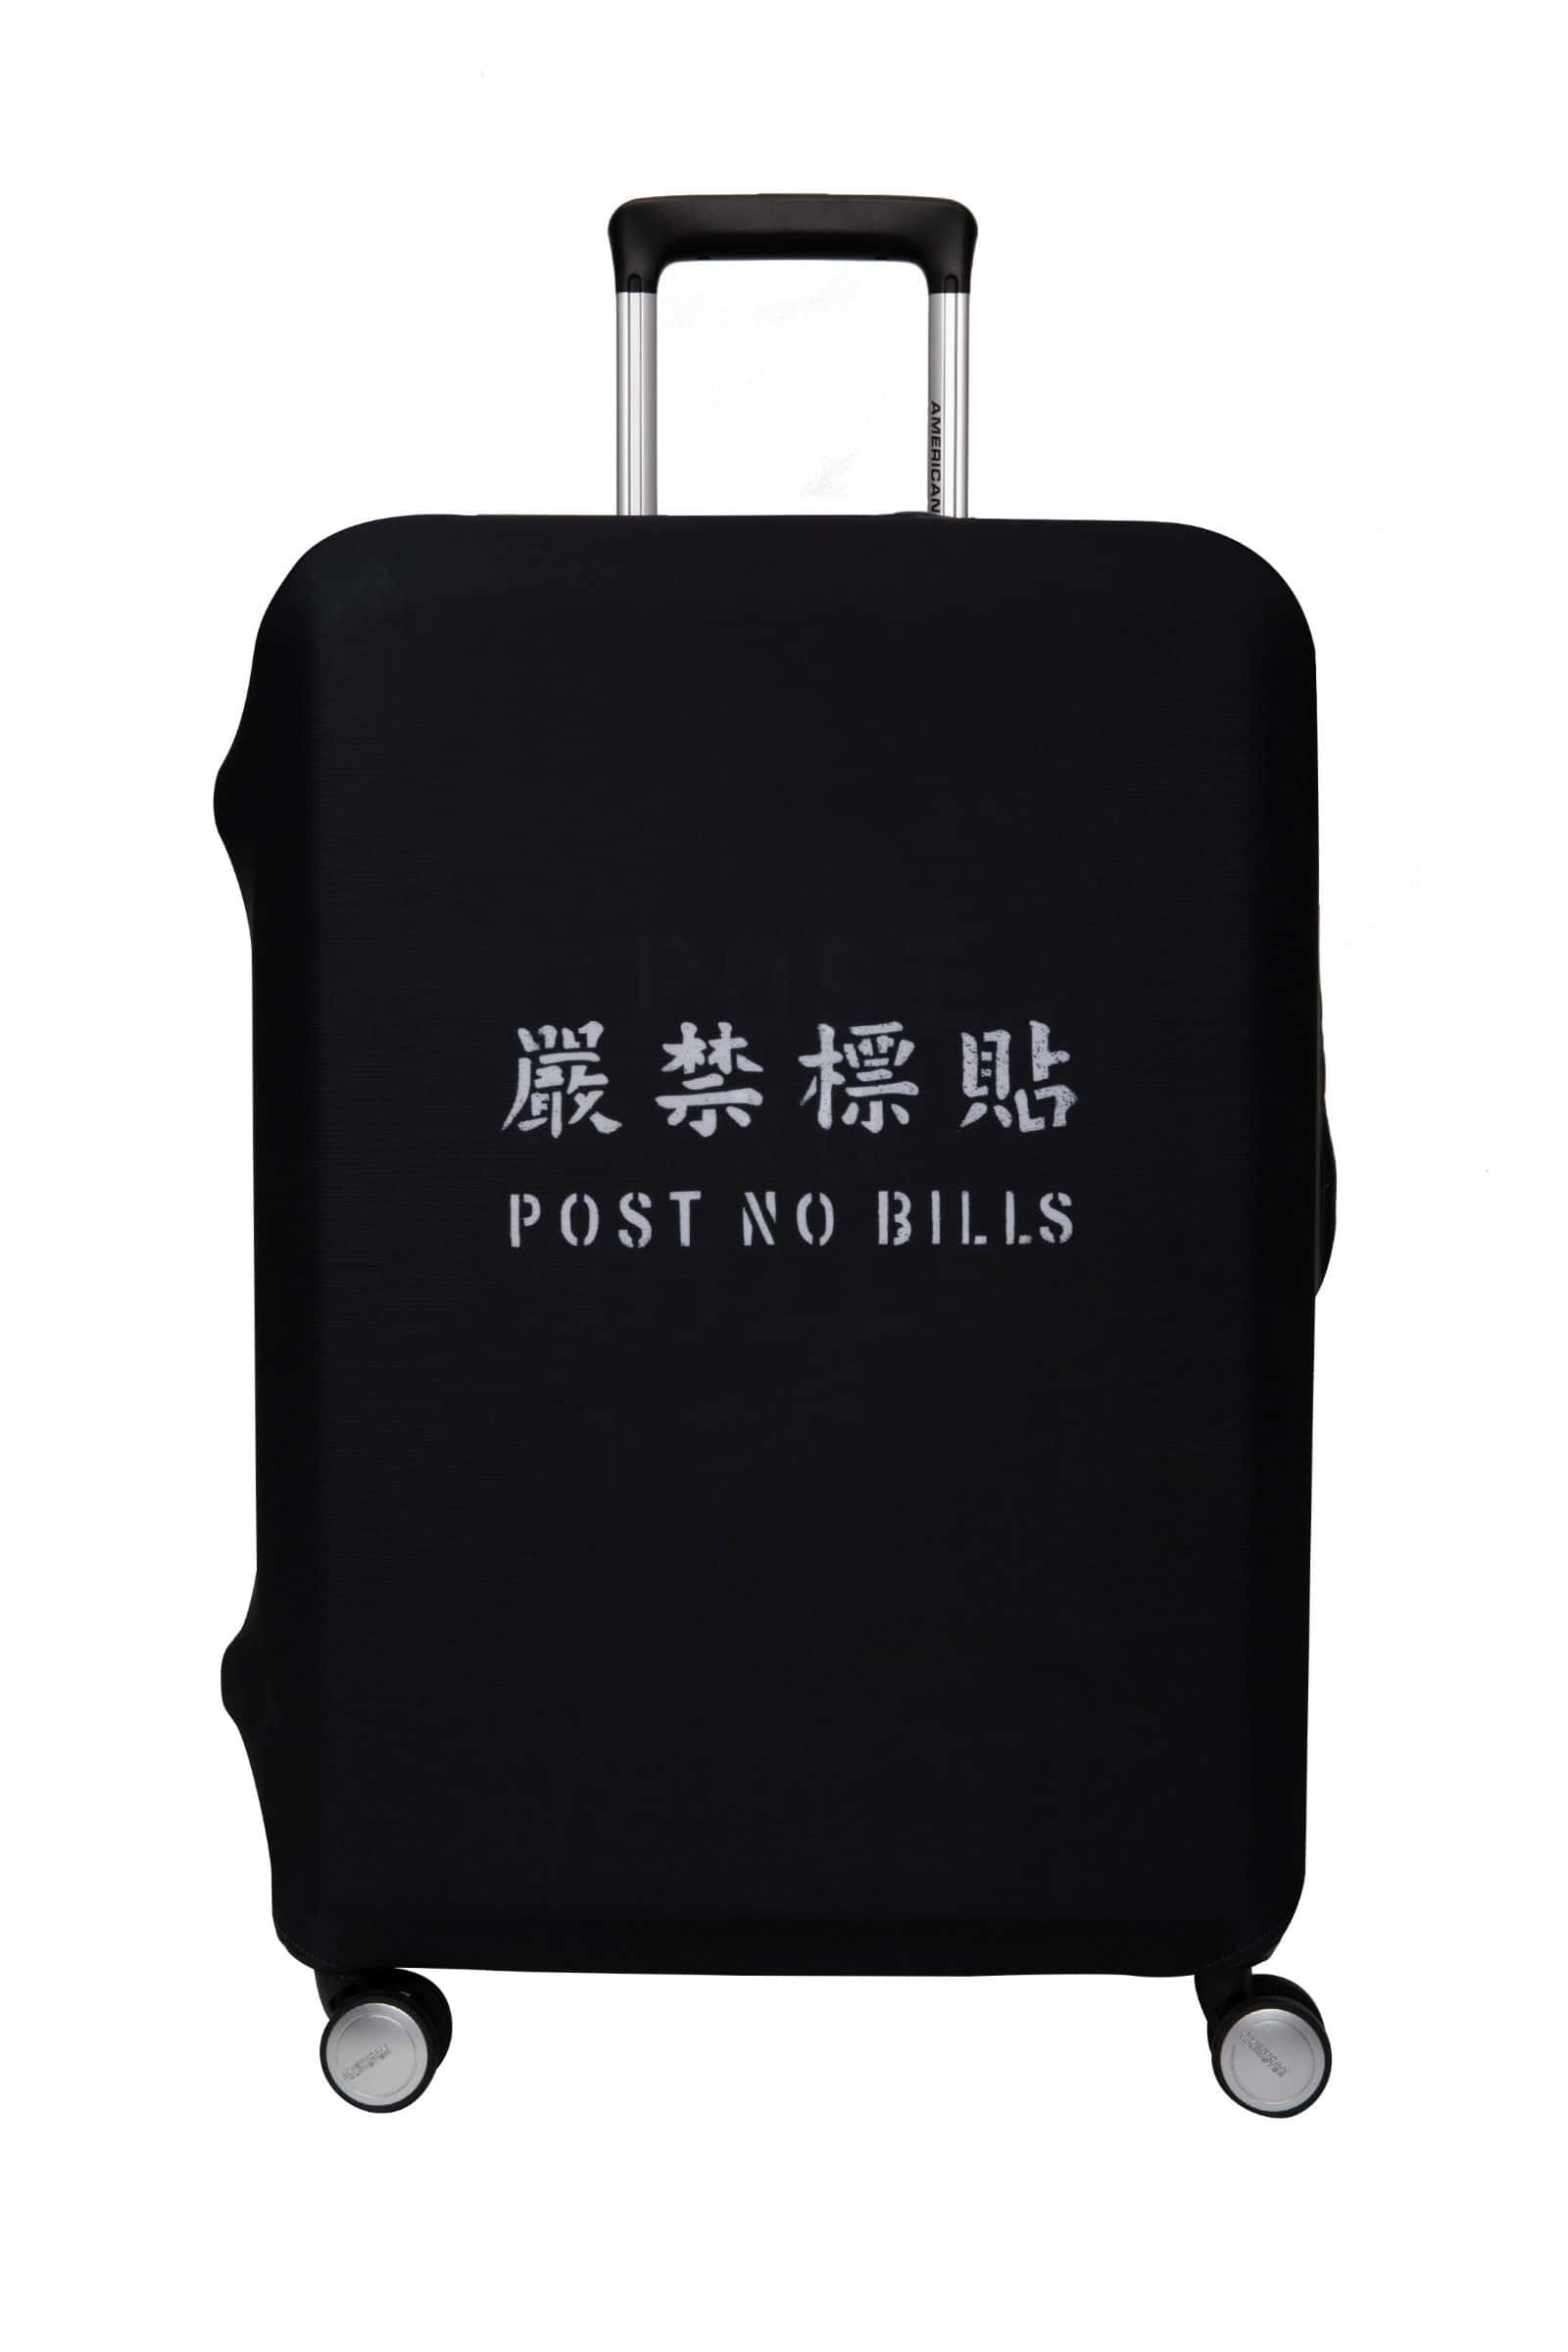 I COME FROM HK 彈性行李箱套 (大)  size | American Tourister